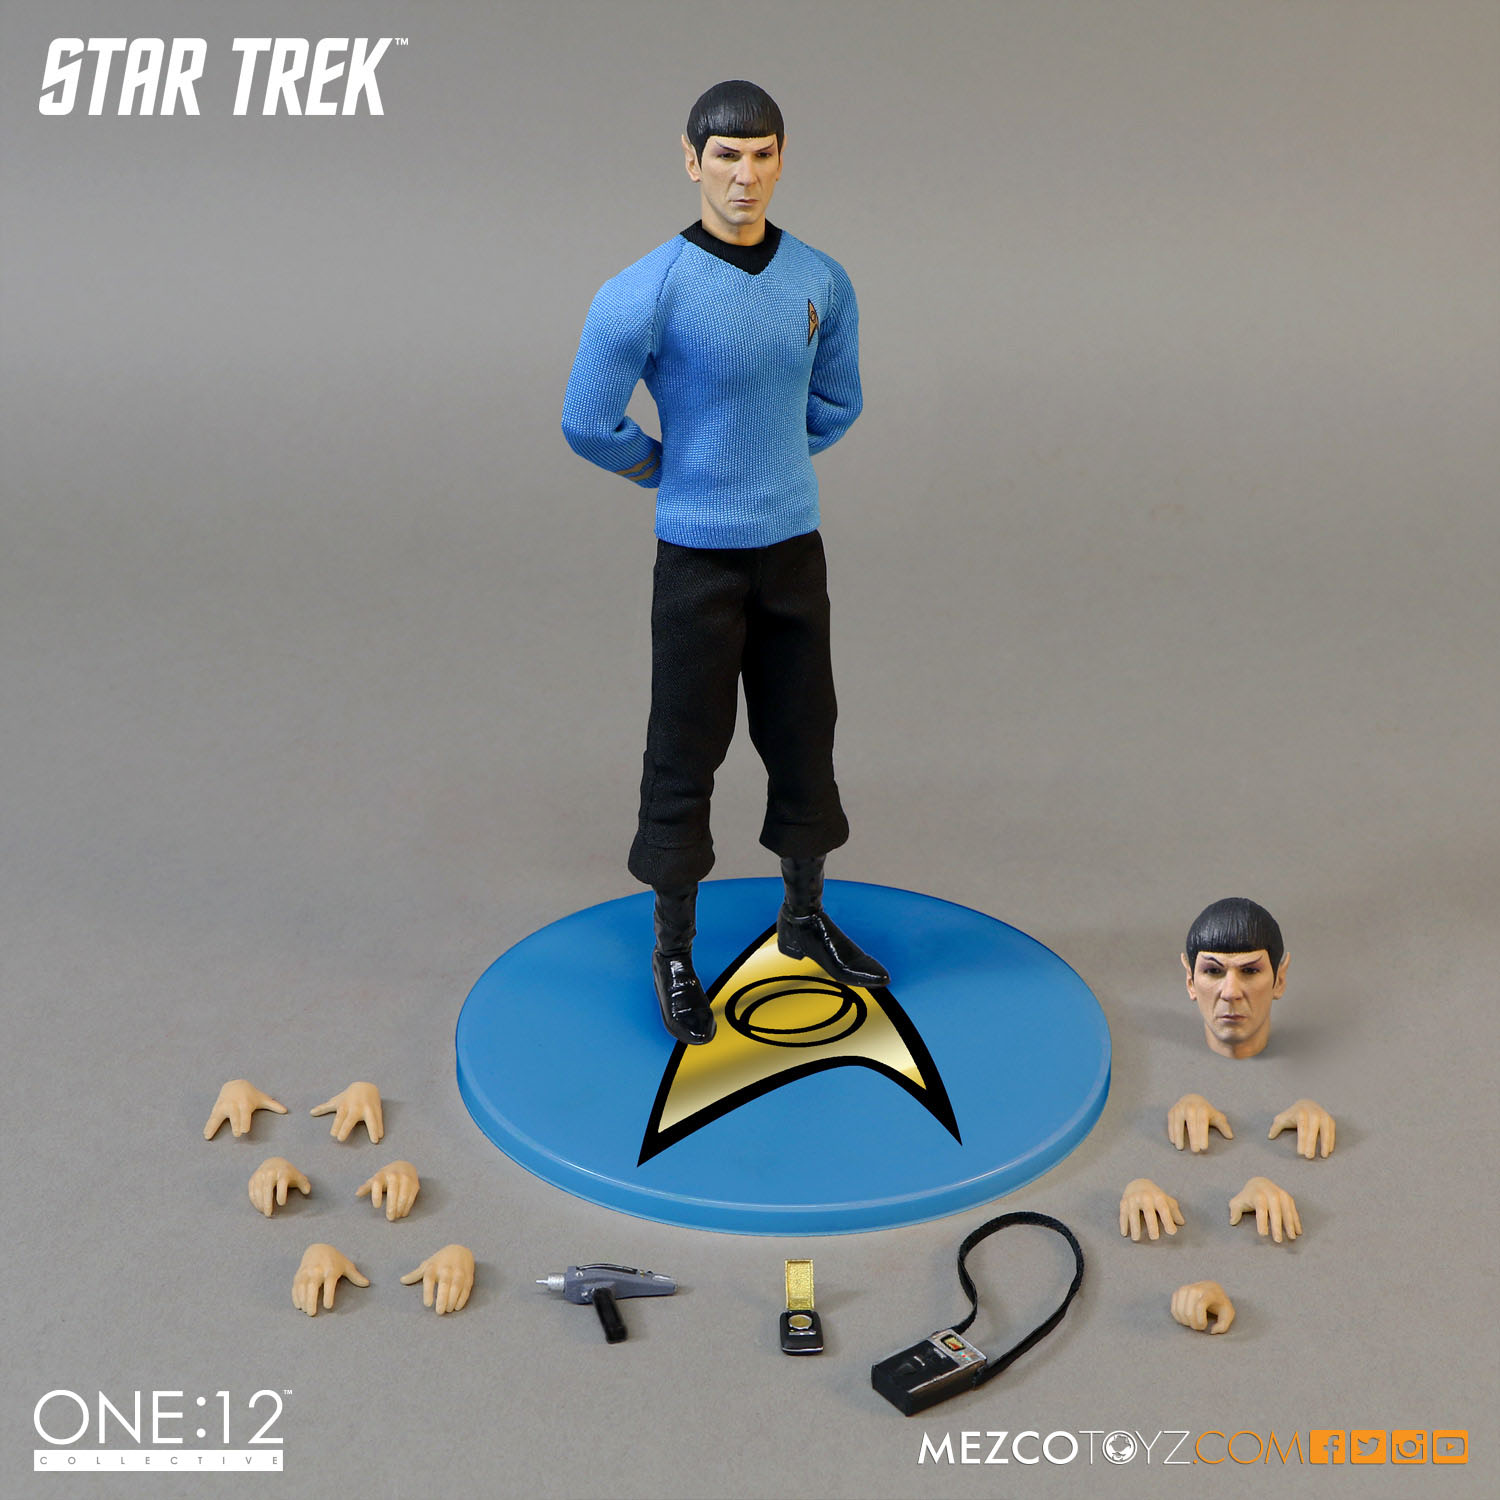 Star Trek Spock One:12 Collective Action Figure